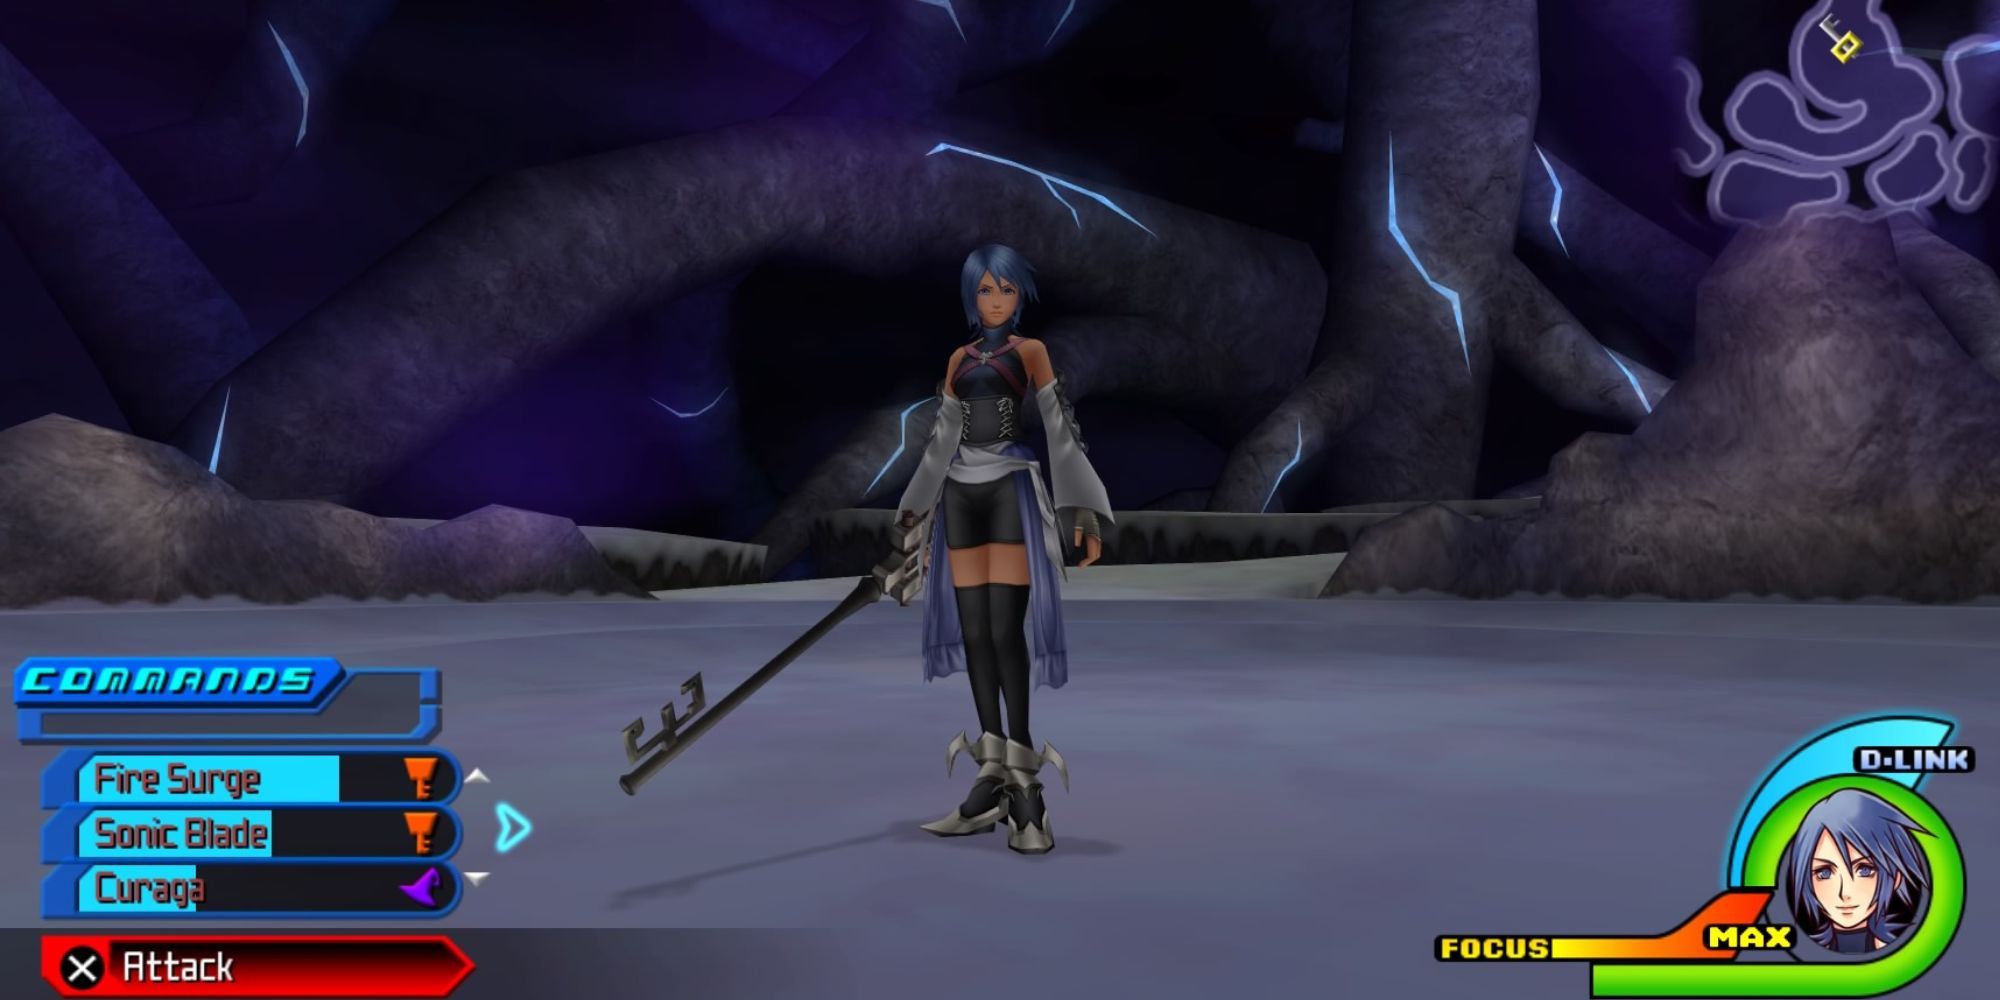 Playing as Aqua inside the Realm of Darkness during the Secret Episode.